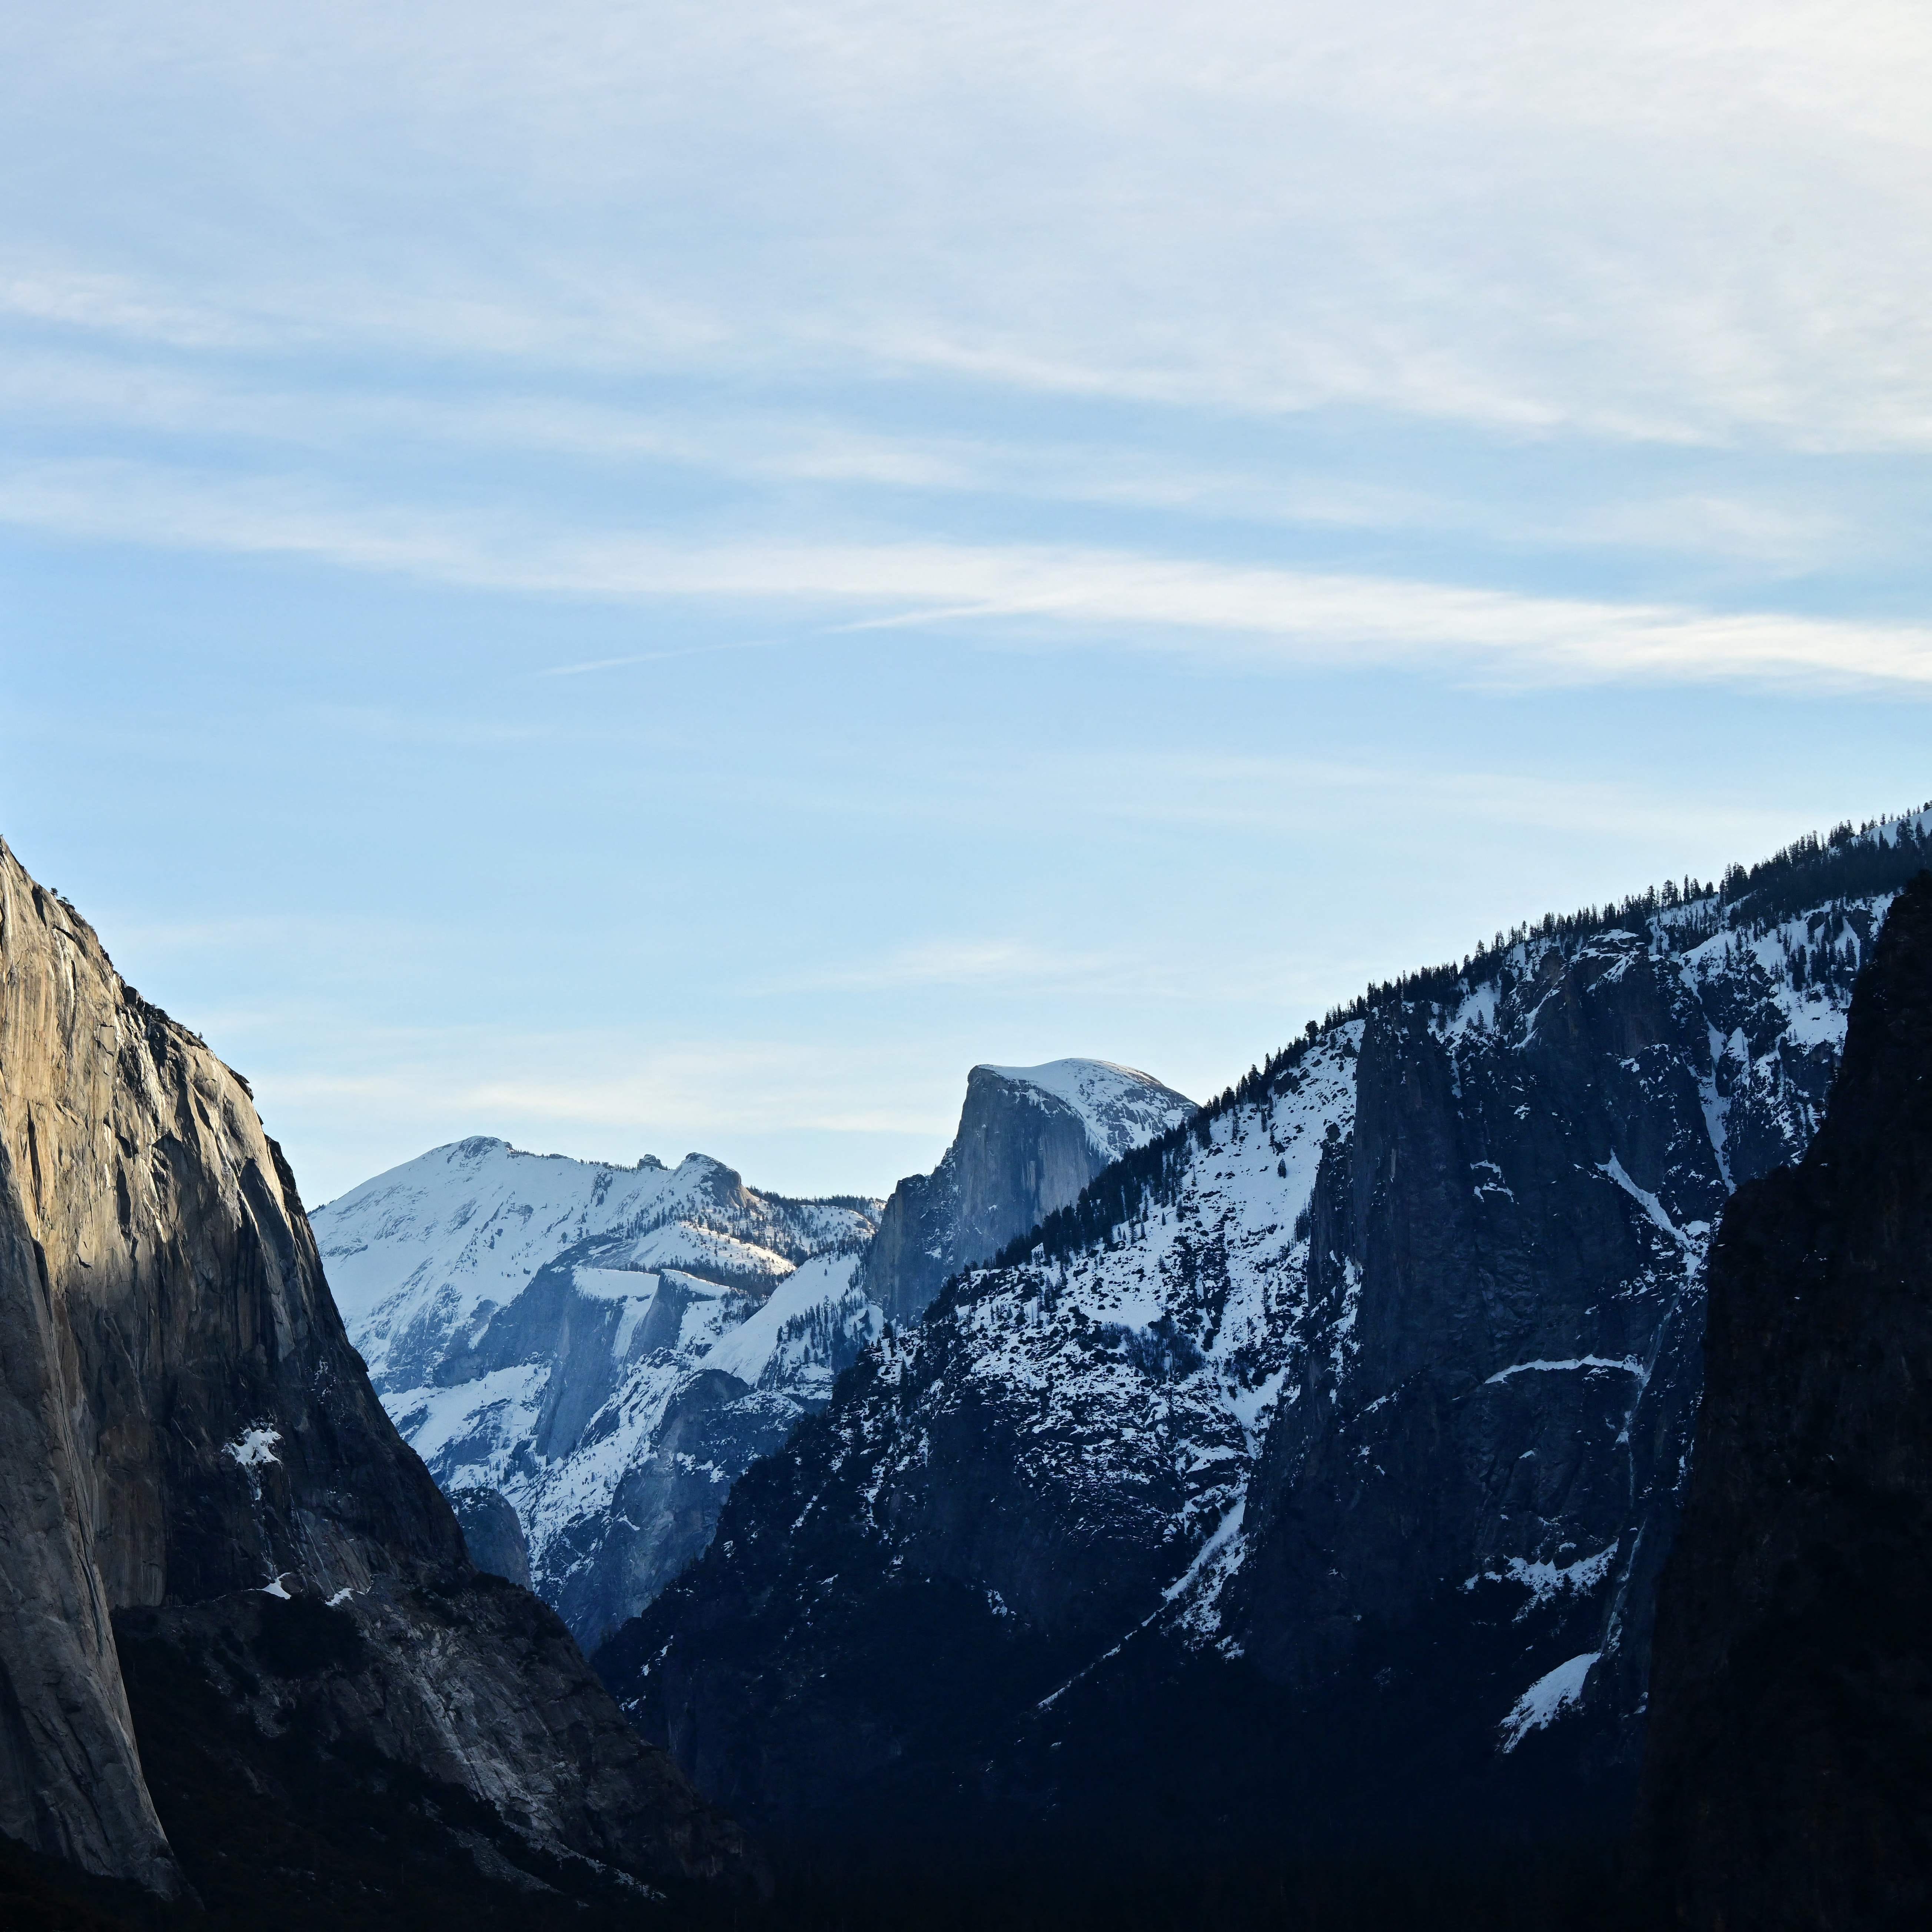 The view of Yosemite National Park's famed landmarks El Capitan (L) and Half Dome (R) is seen from Tunnel View on Feb. 16, 2023.